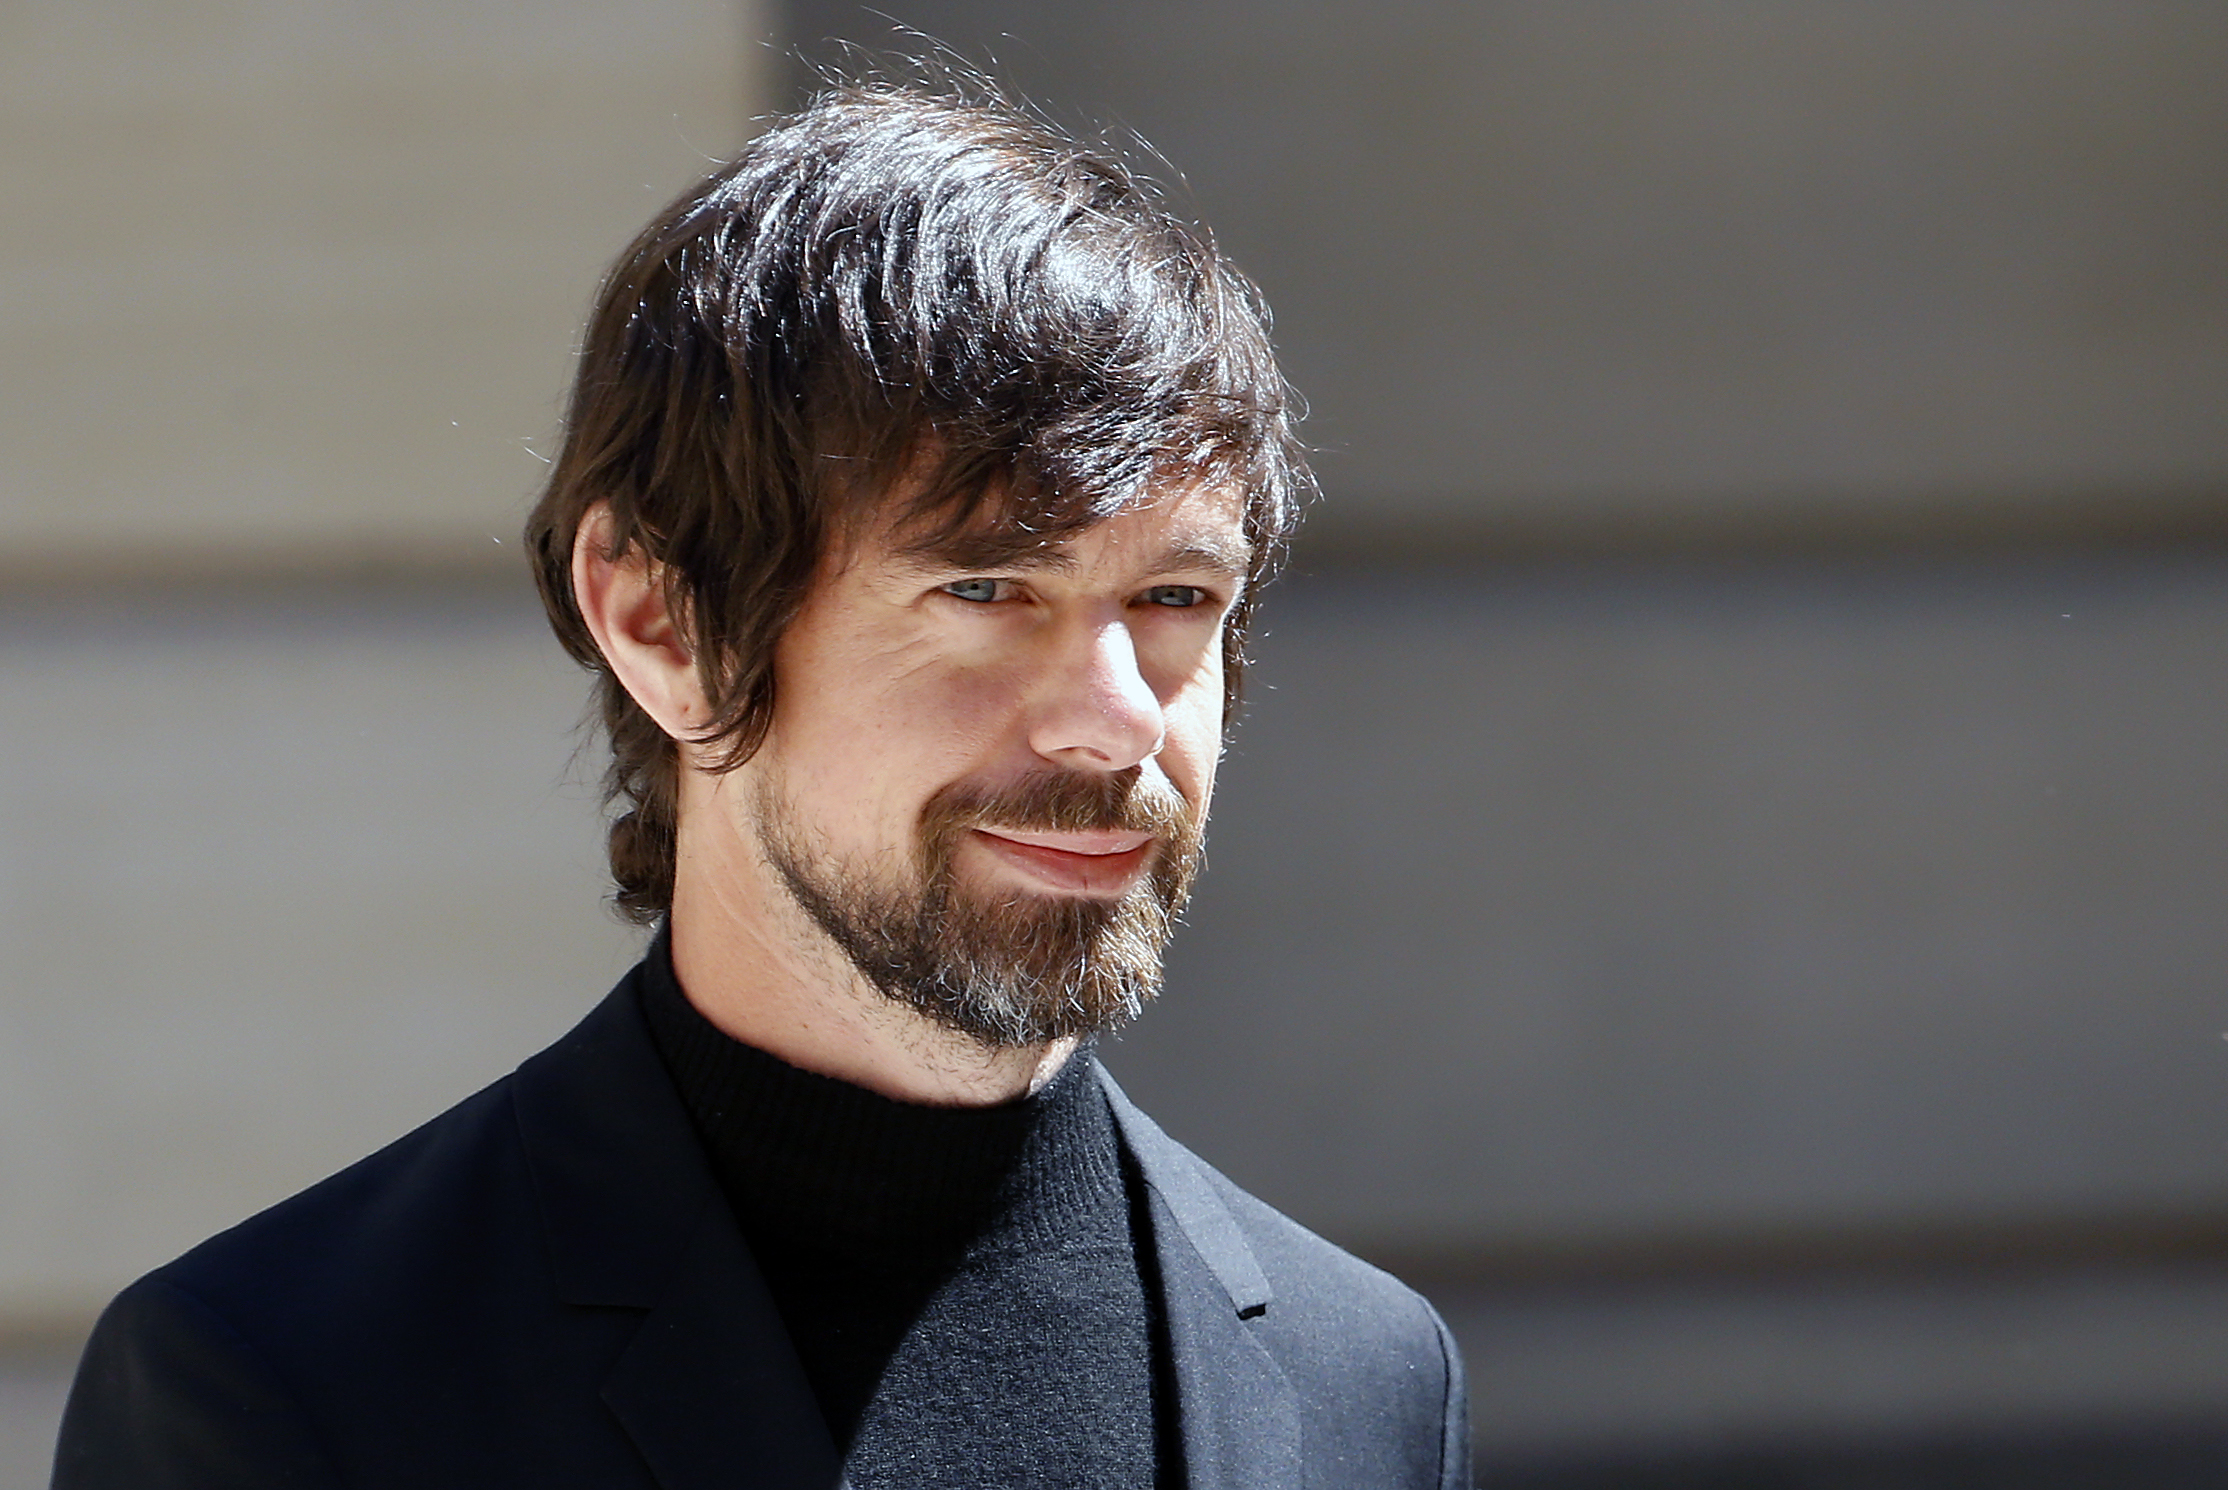 Jack Dorsey stands in the sunshine at the “Tech For Good Summit” at Hotel De Marigny in Paris.